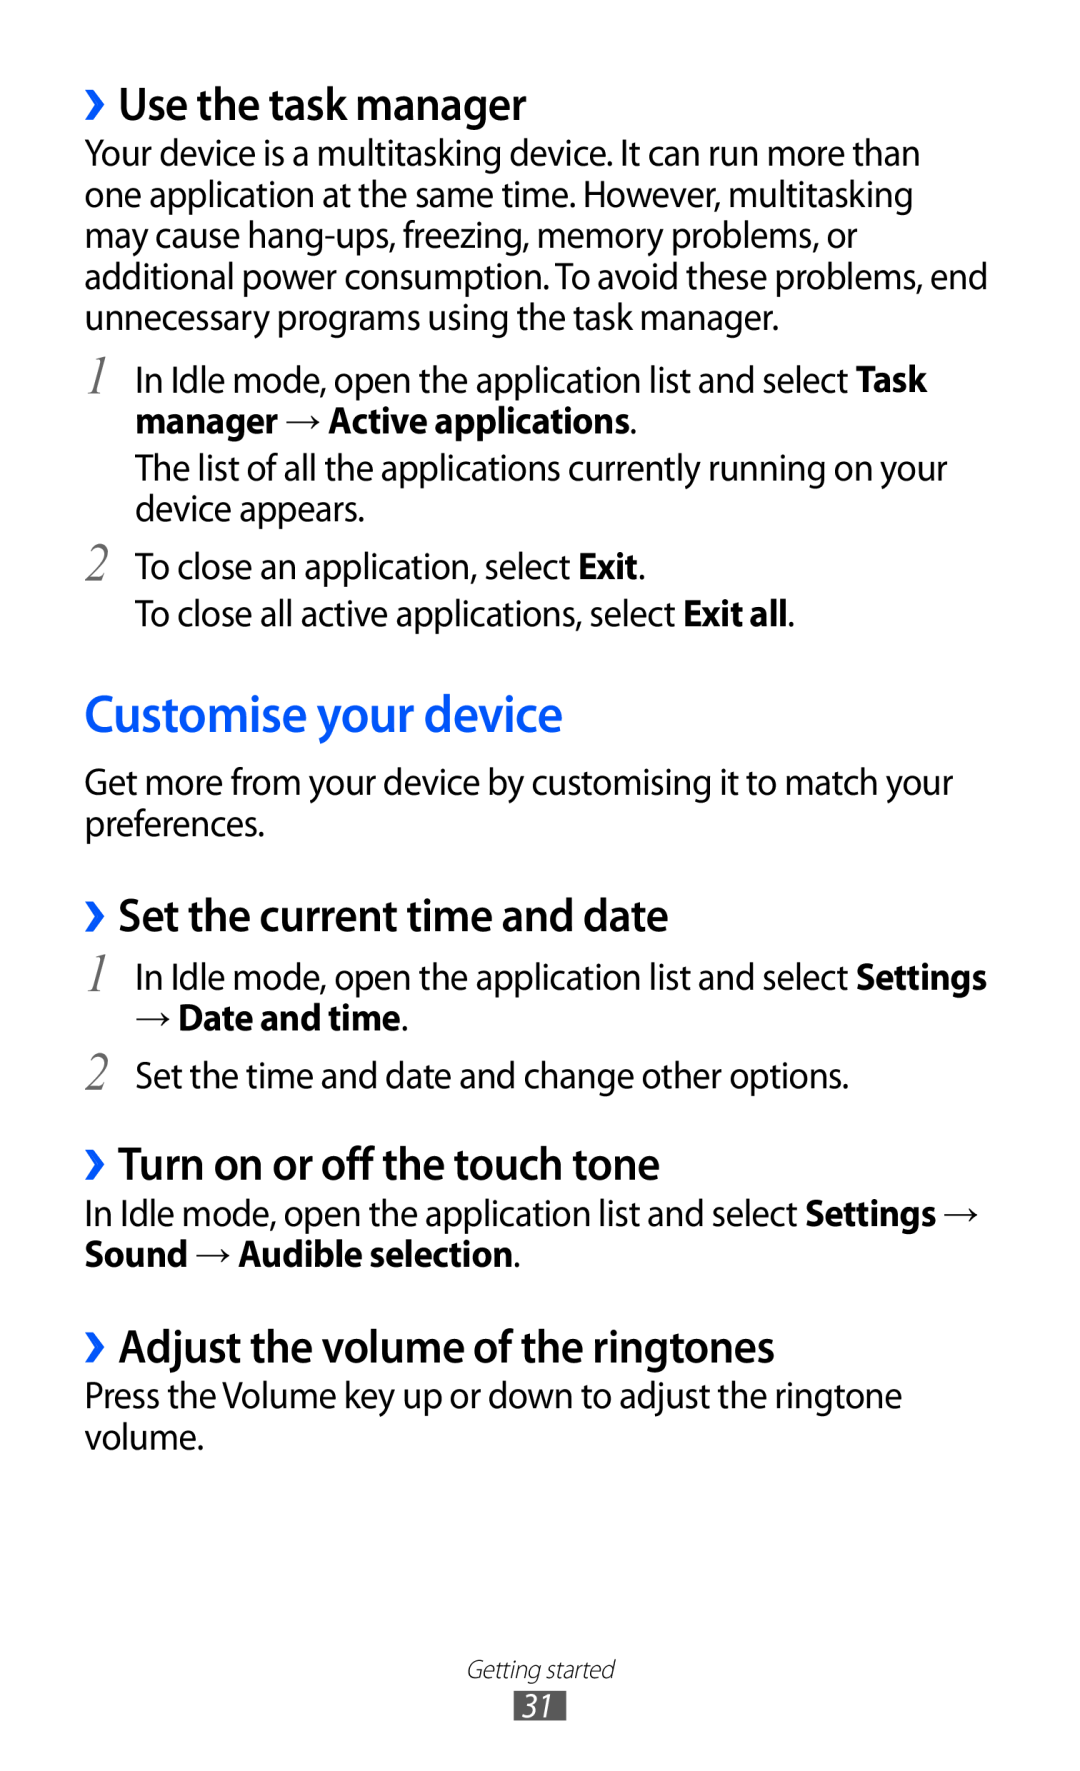 Samsung GT-I9070 Customise your device, ››Use the task manager, ››Set the current time and date, → Date and time 